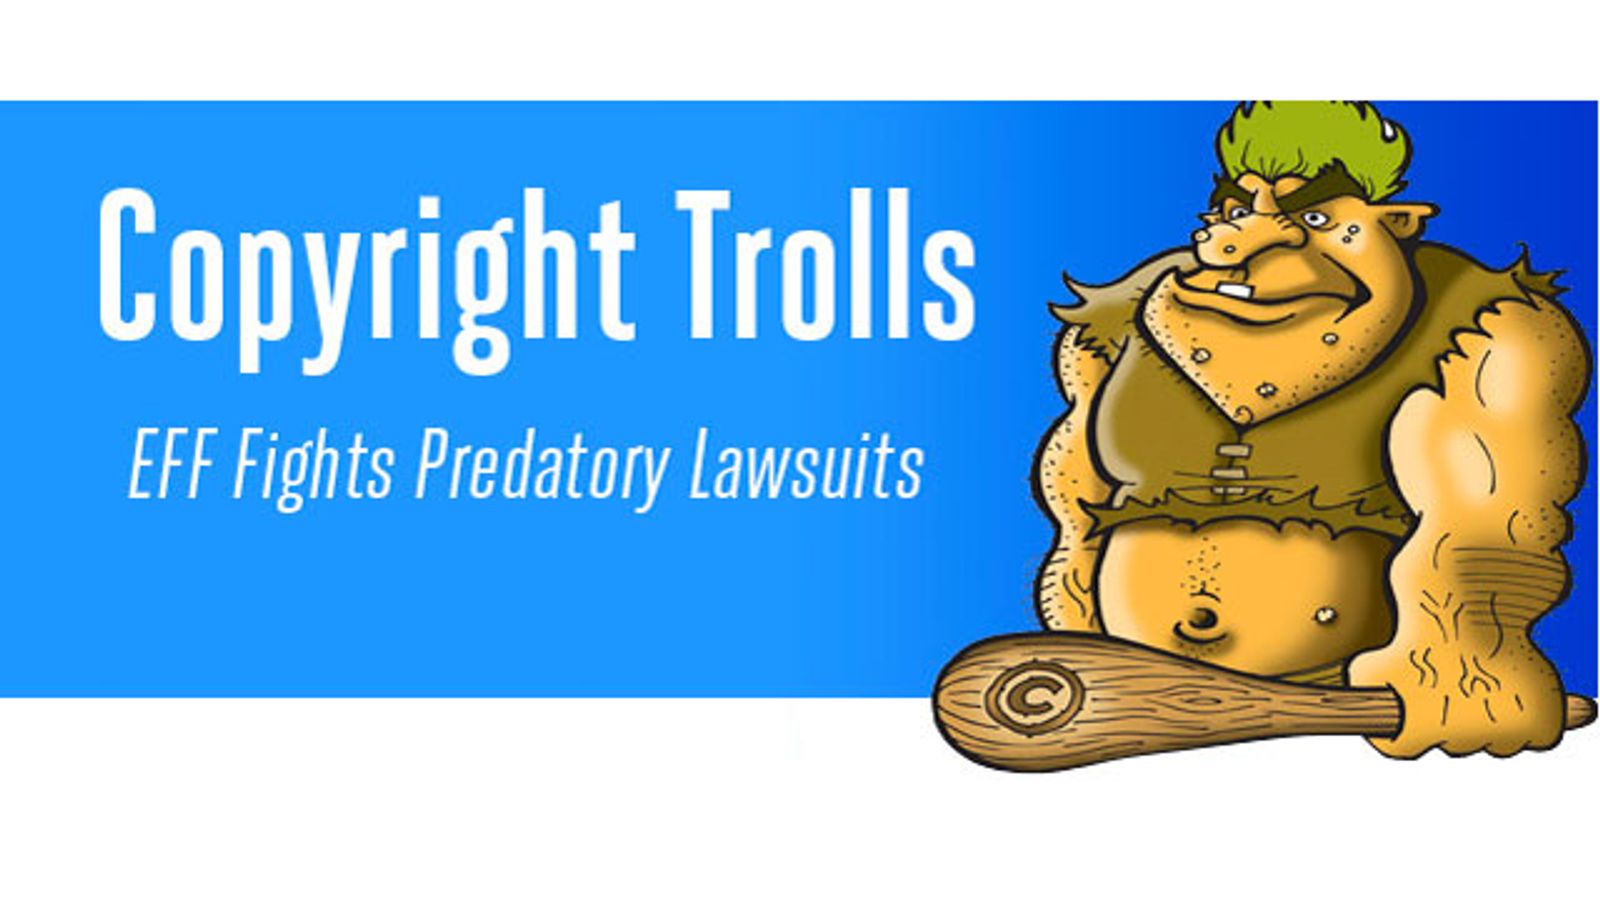 EFF Claims Victory Against ‘Copyright Troll’ Attorney Evan Stone